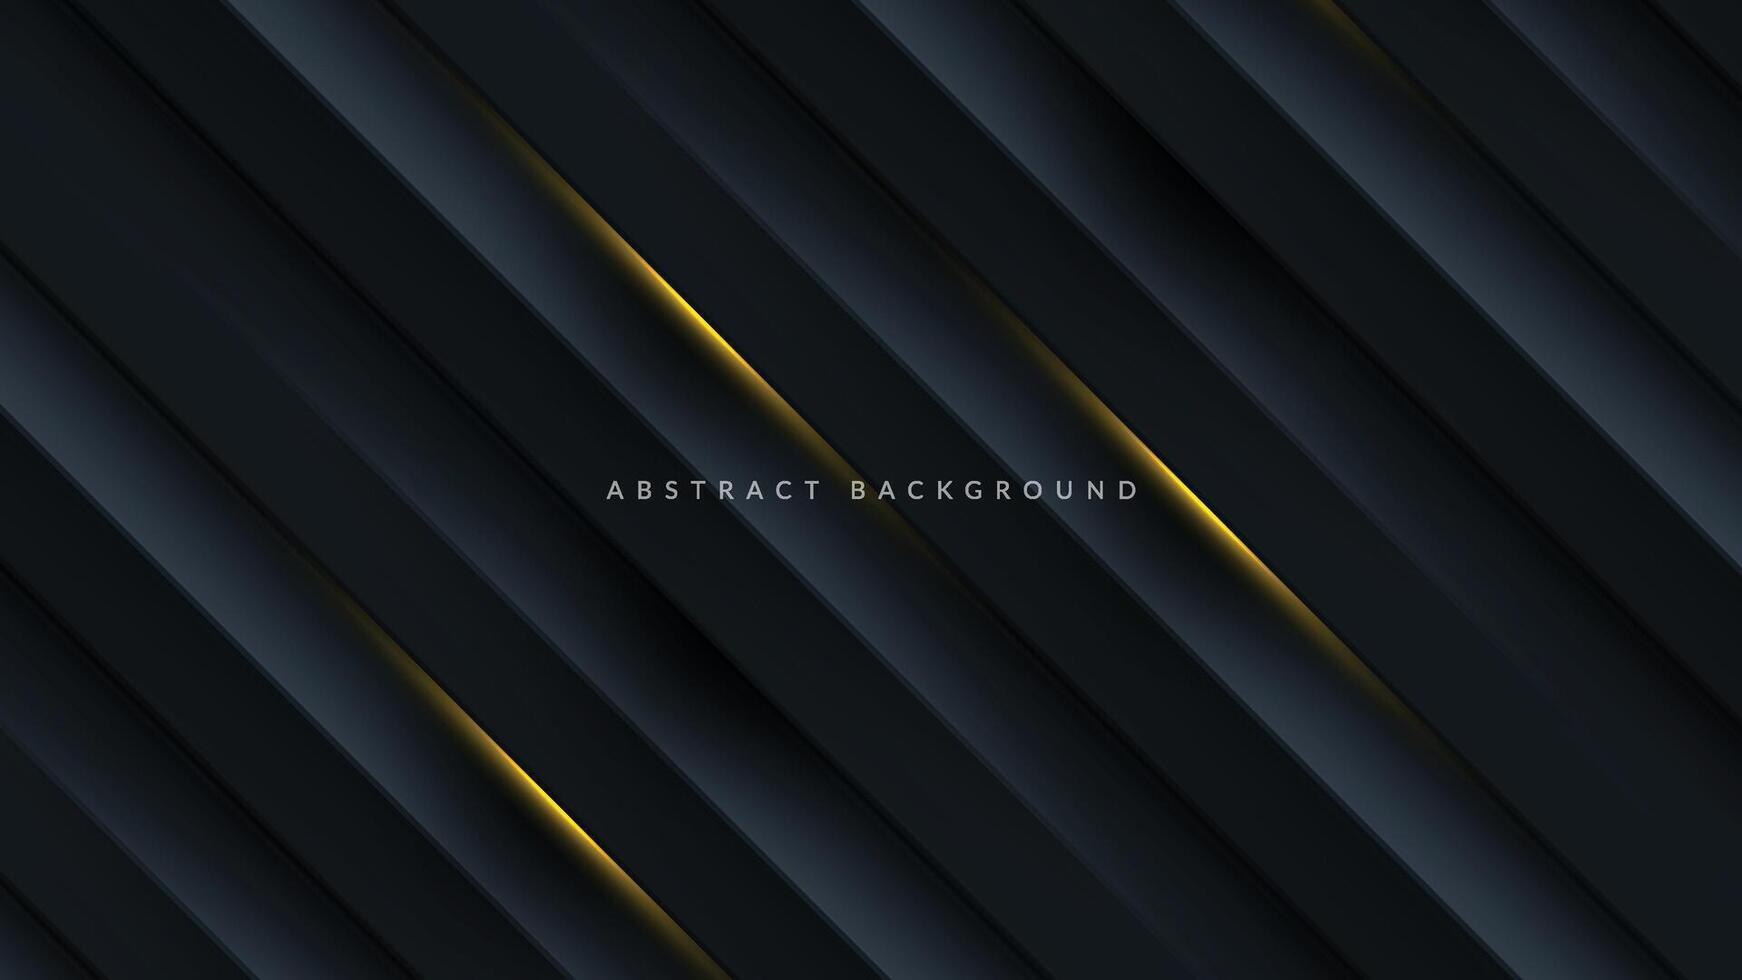 Dark abstract background with golden lines vector